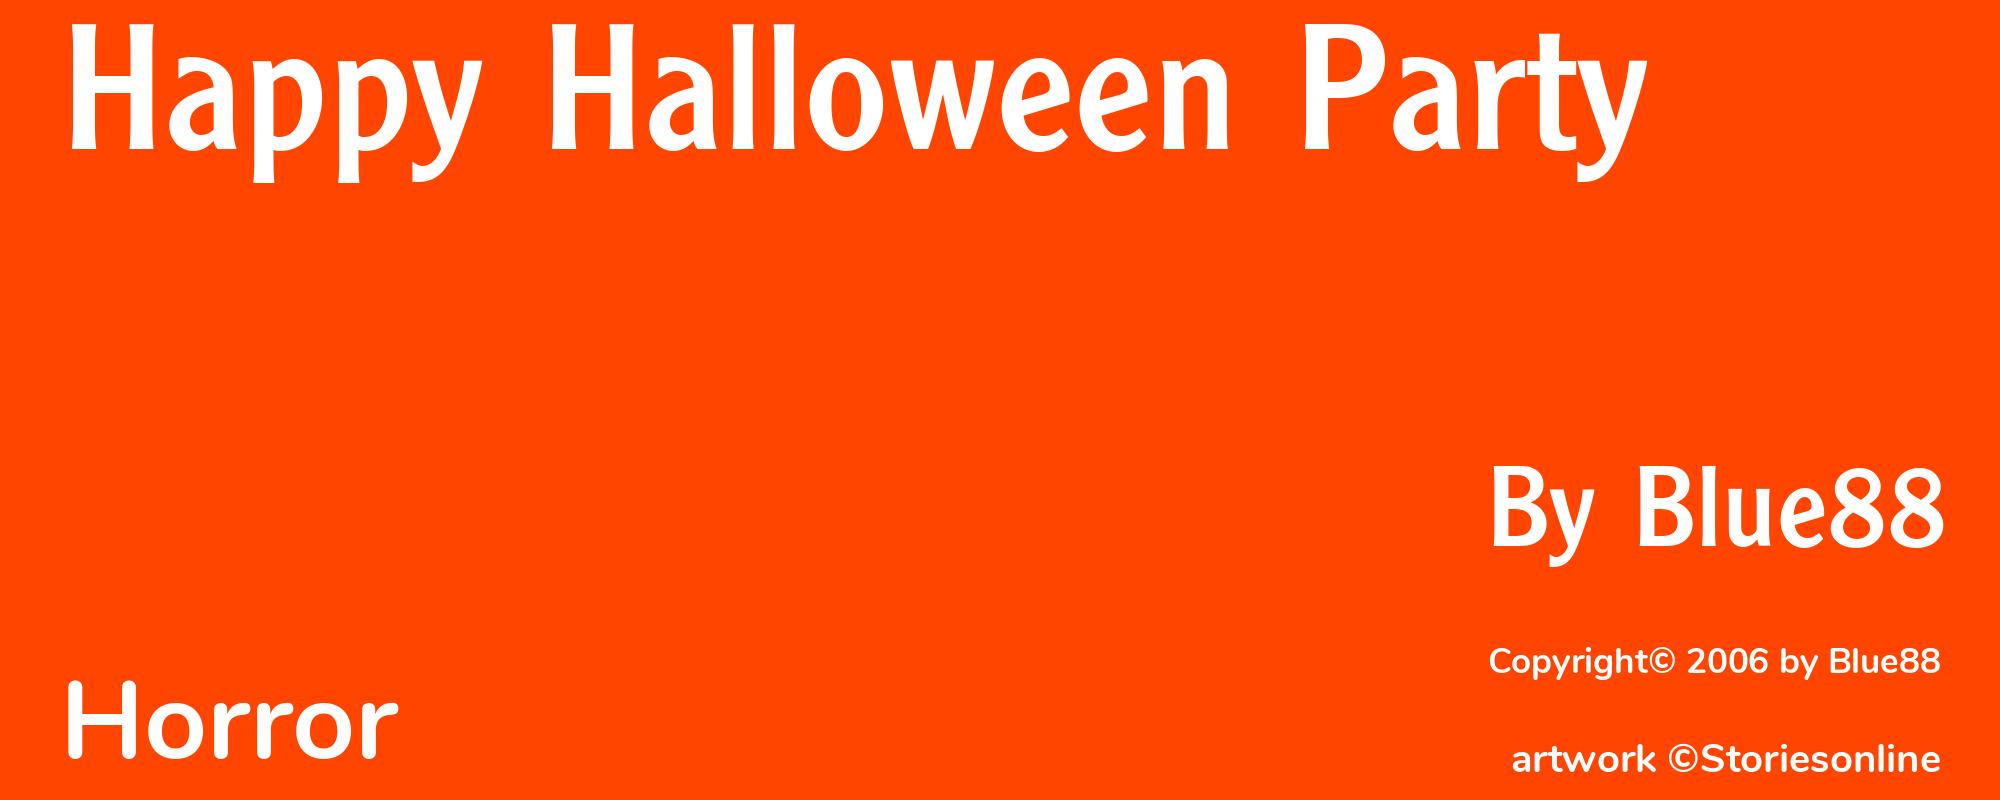 Happy Halloween Party - Cover